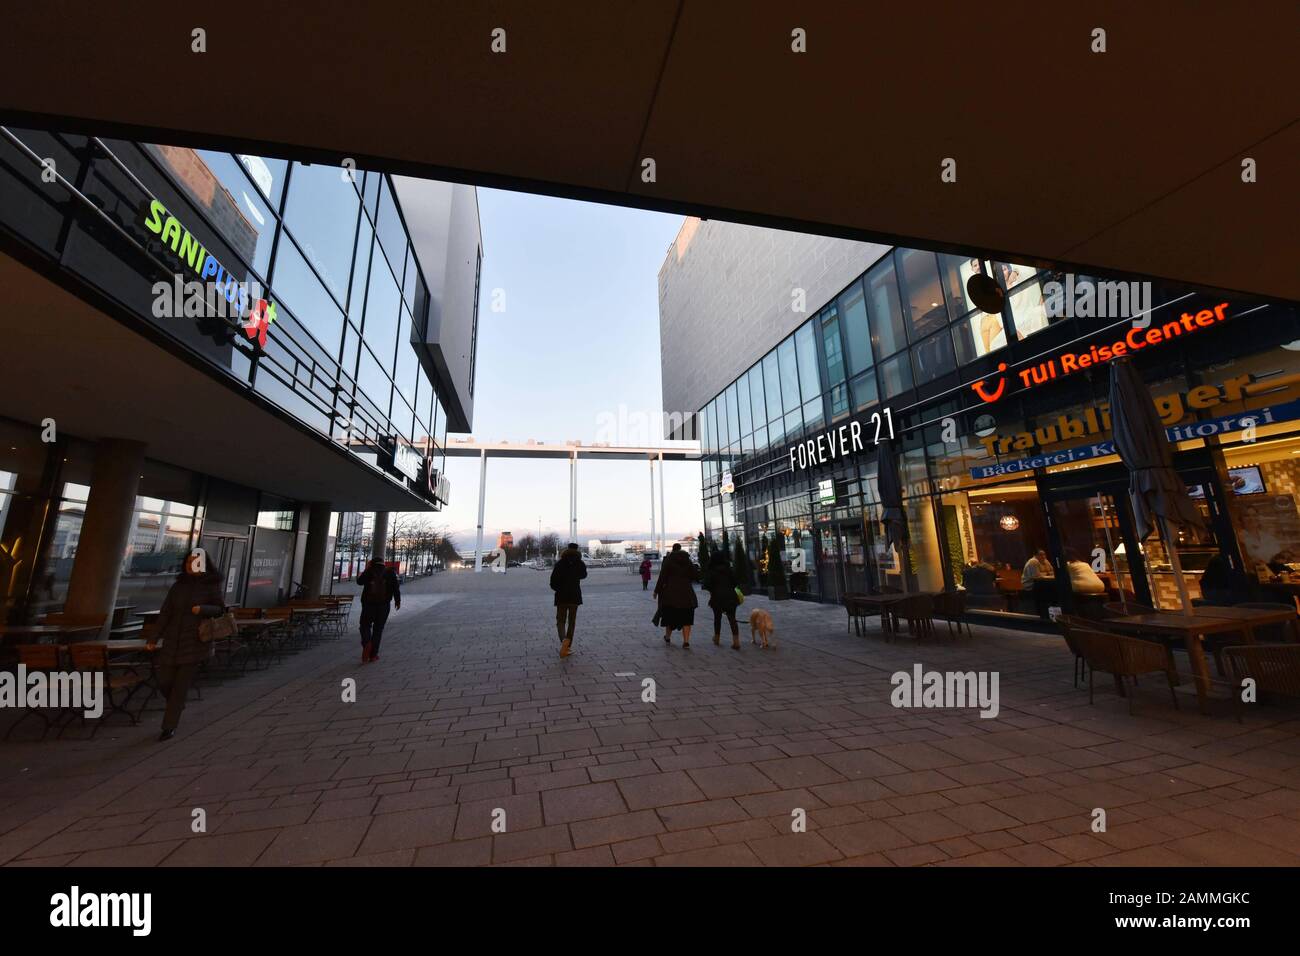 Riem arcaden hi-res stock photography and images - Alamy